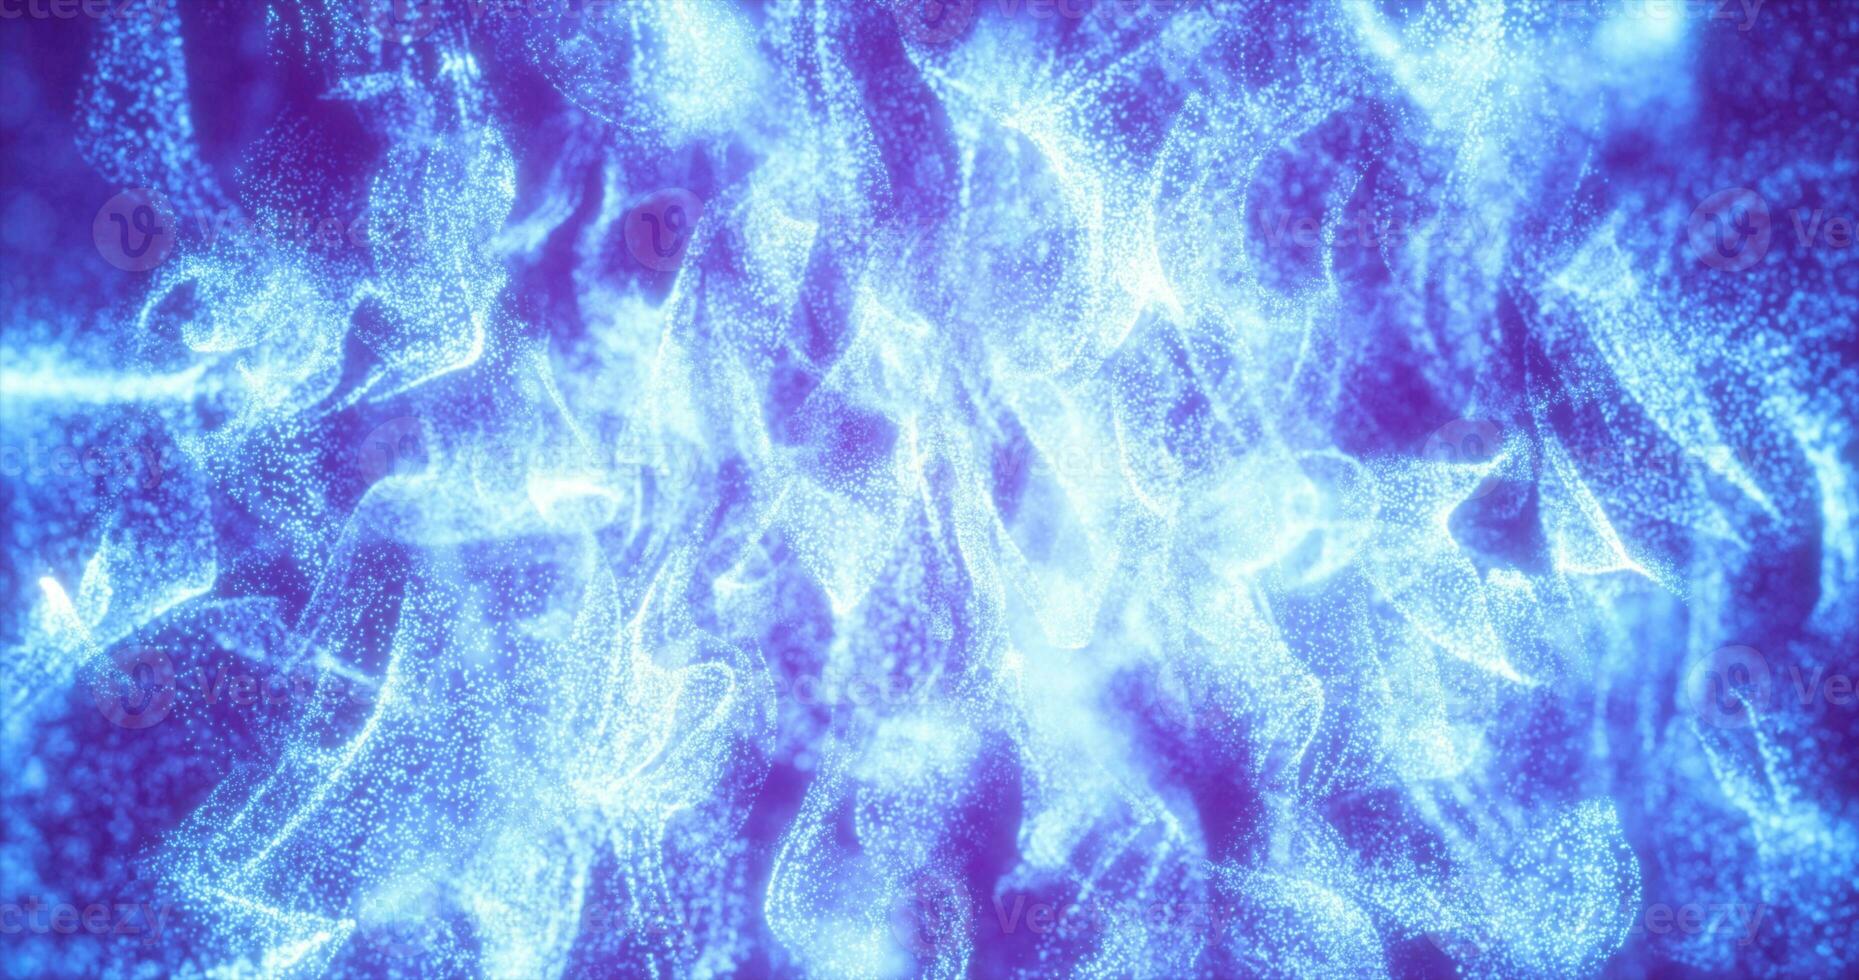 Abstract blue energy waves futuristic hi-tech glowing particles background photo